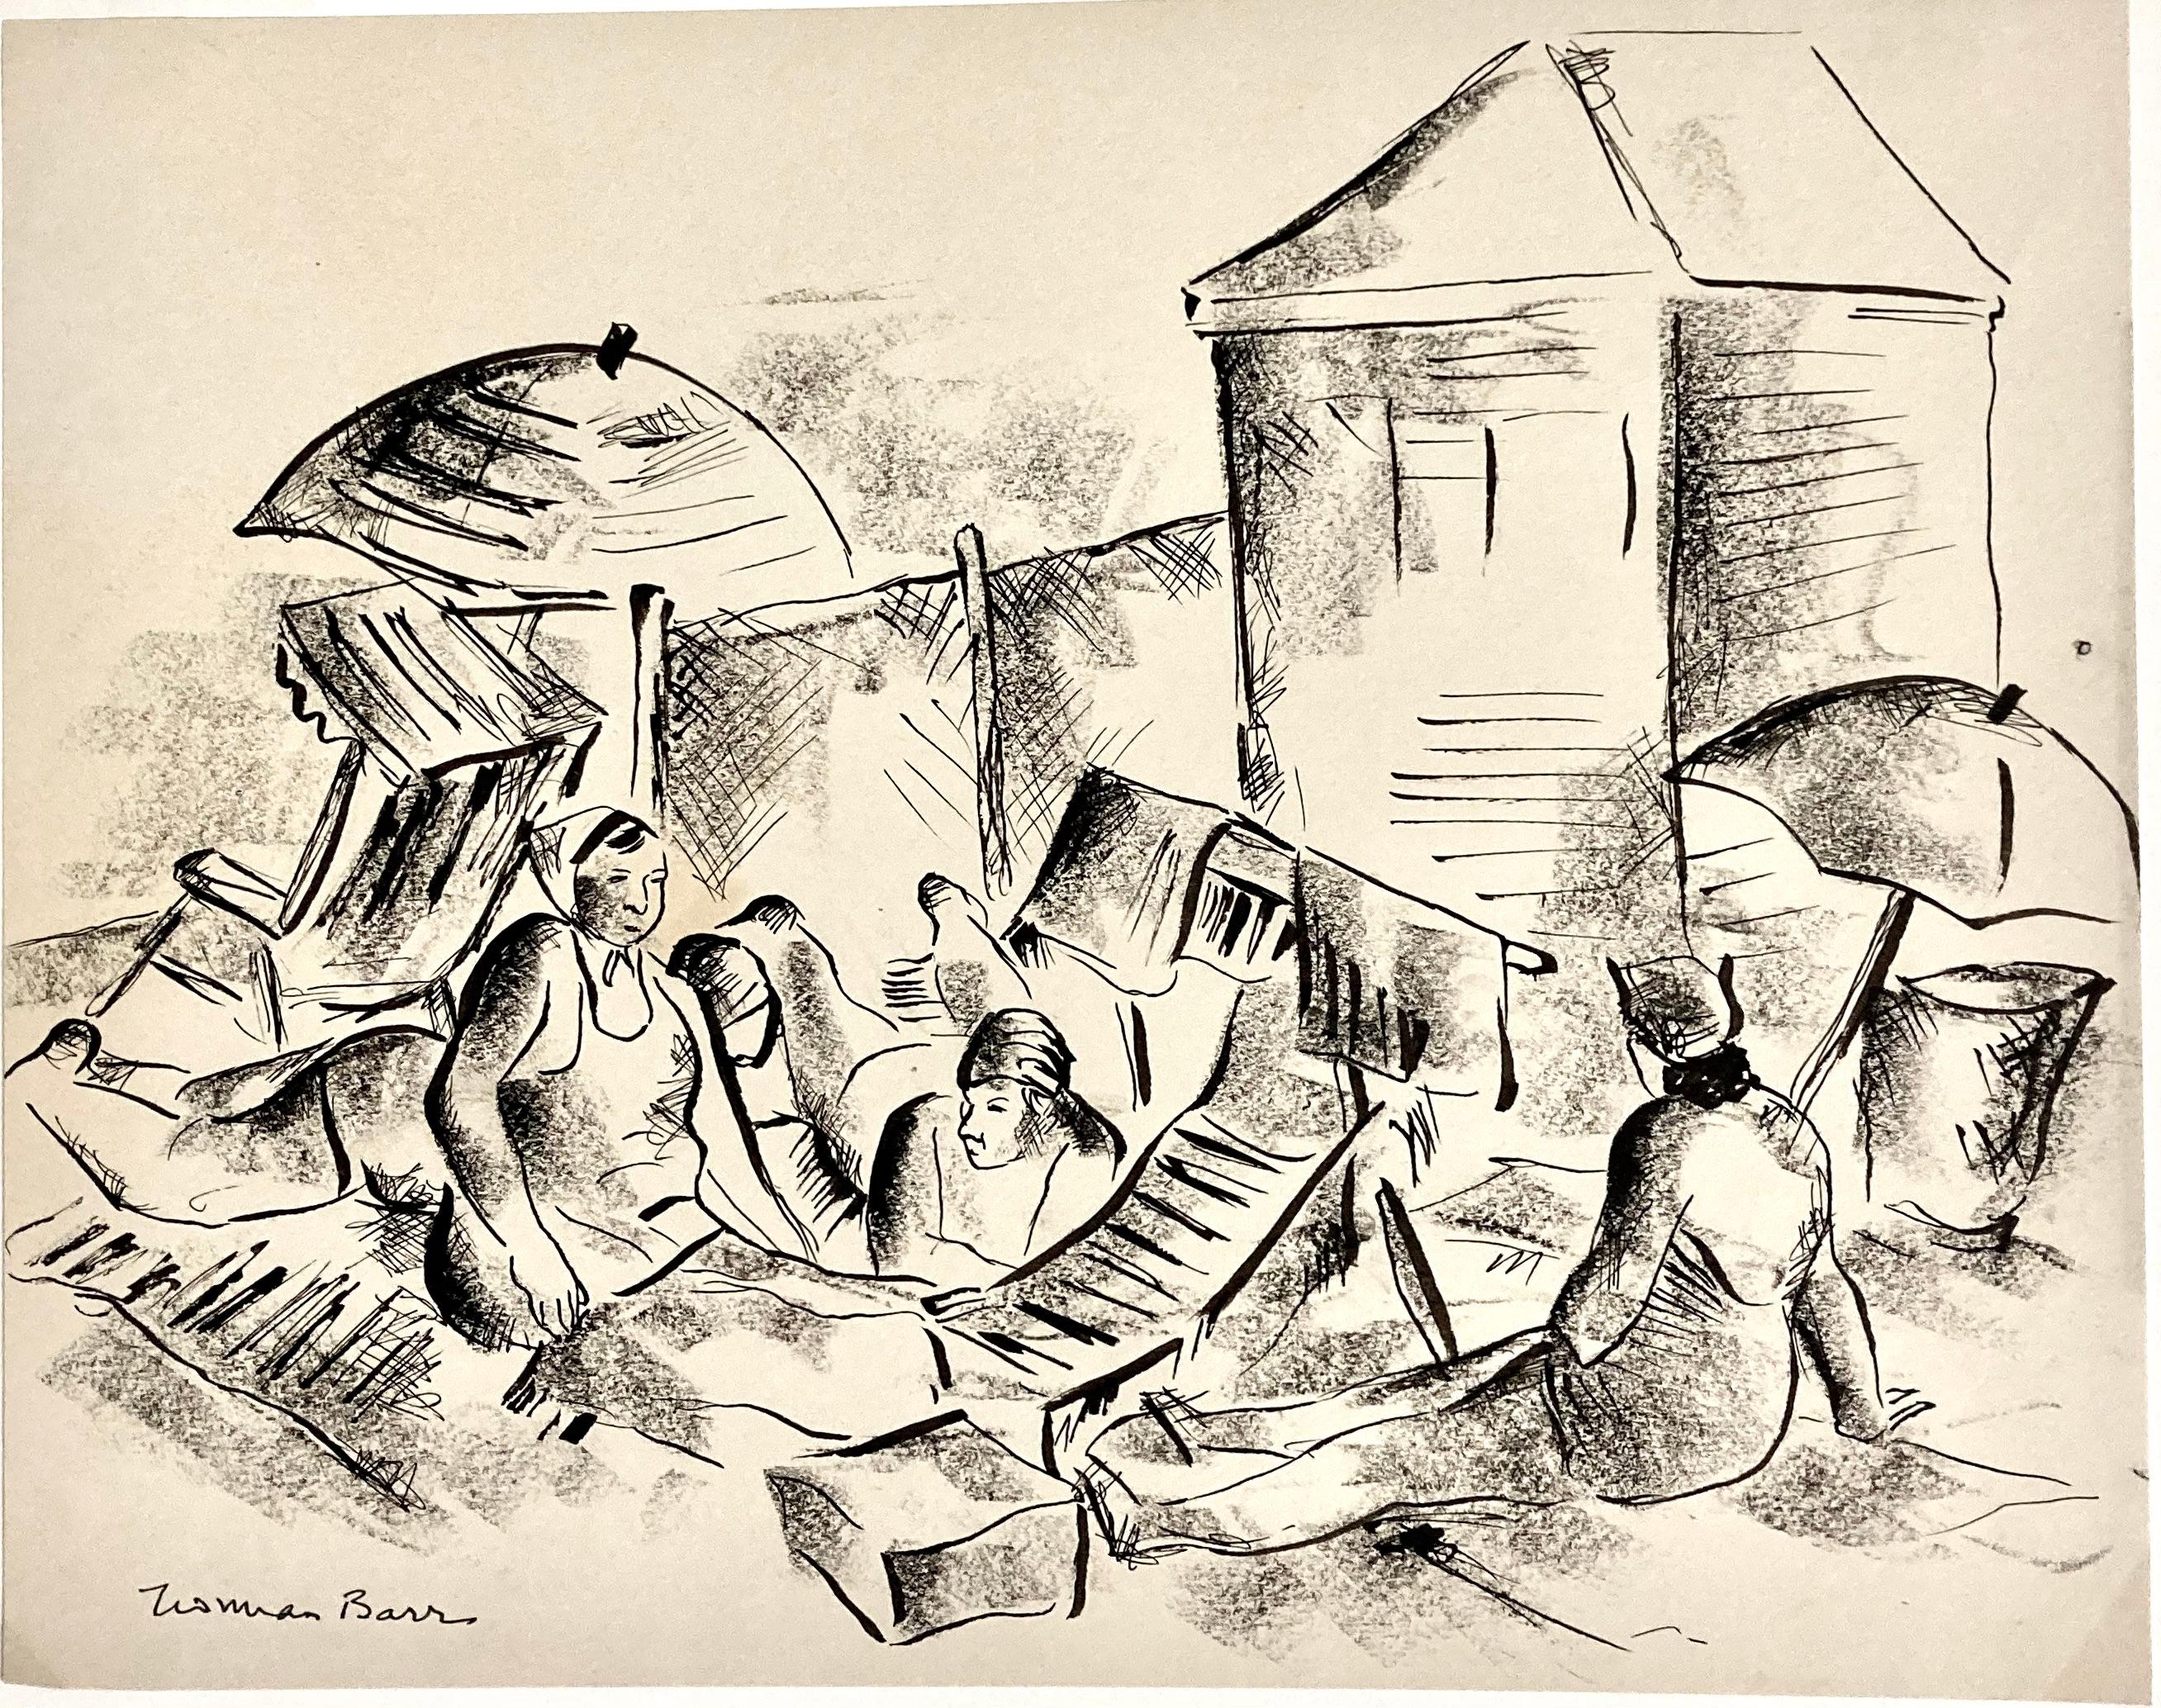 Norman Barr recorded his beloved New York City from the Bronx, to Coney Island, to the Fulton Fish Market. 

In this period he was on the New Deal's Mural Project. This drawing is signed in ink and titled on the reverse in ink.

